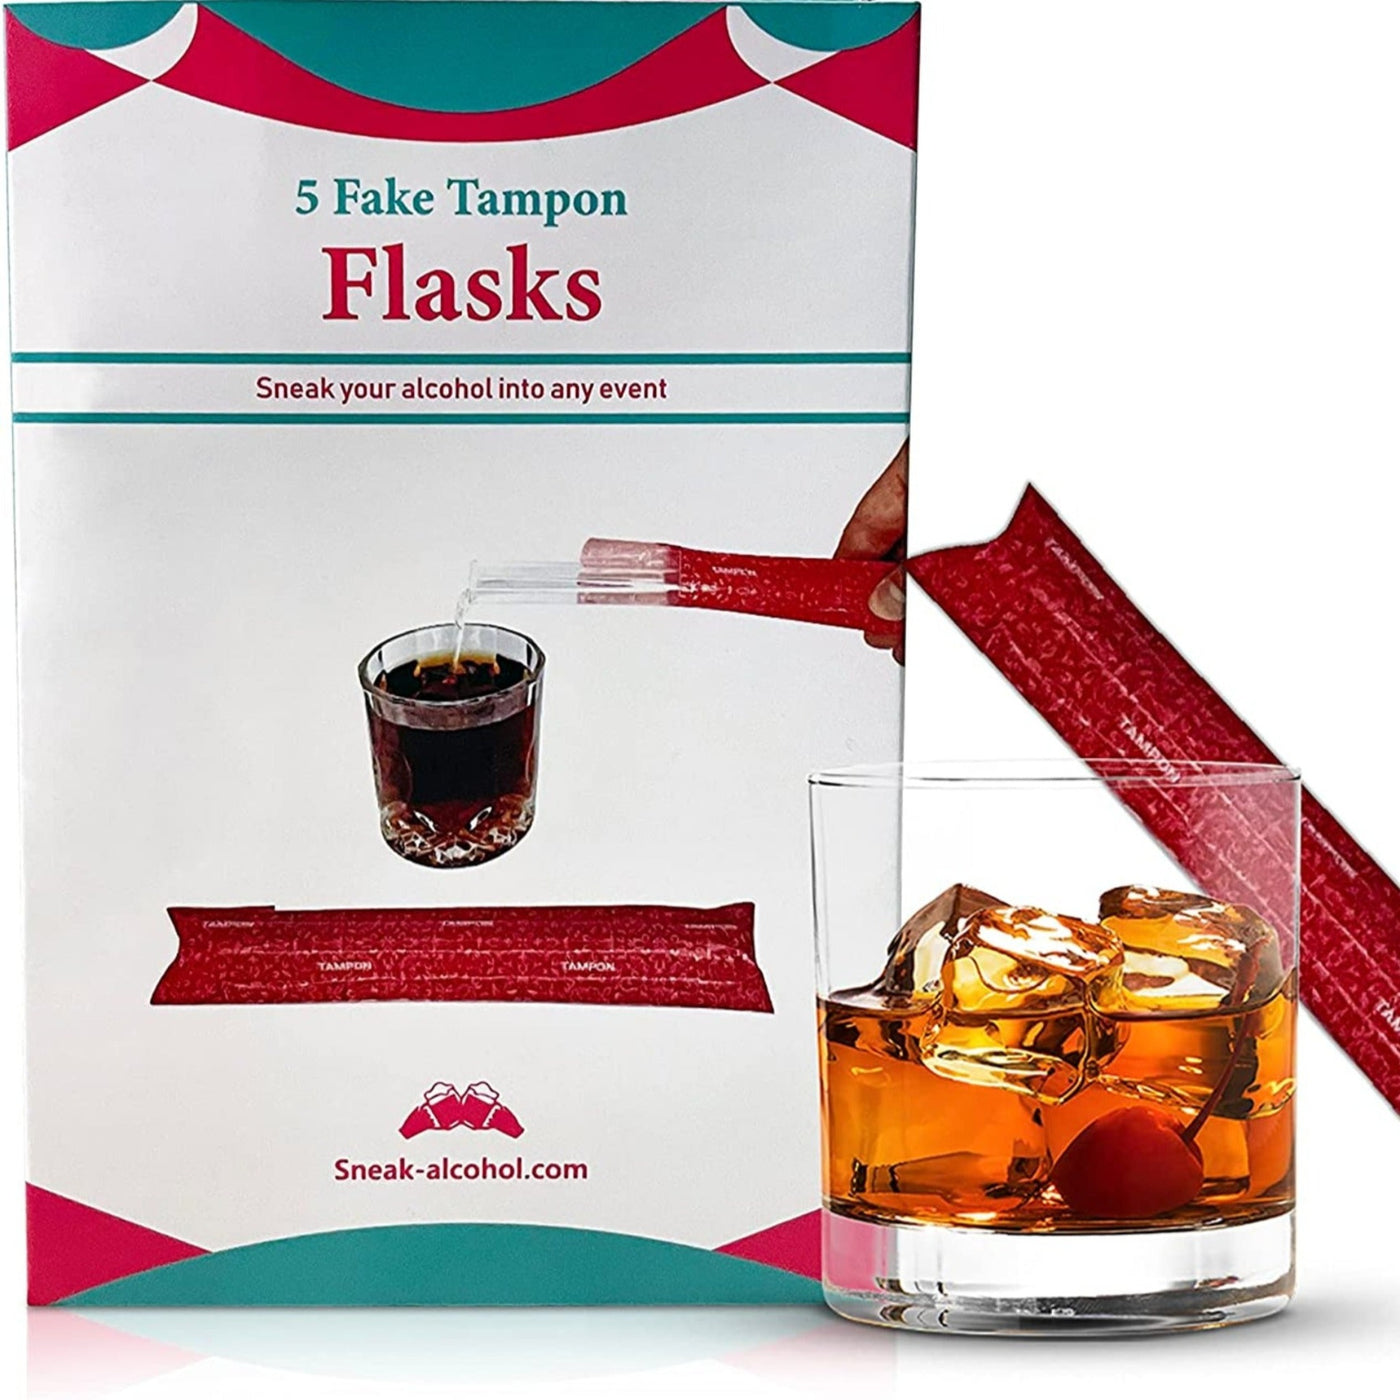 Tampon Flask - Sneak your liquor into any event